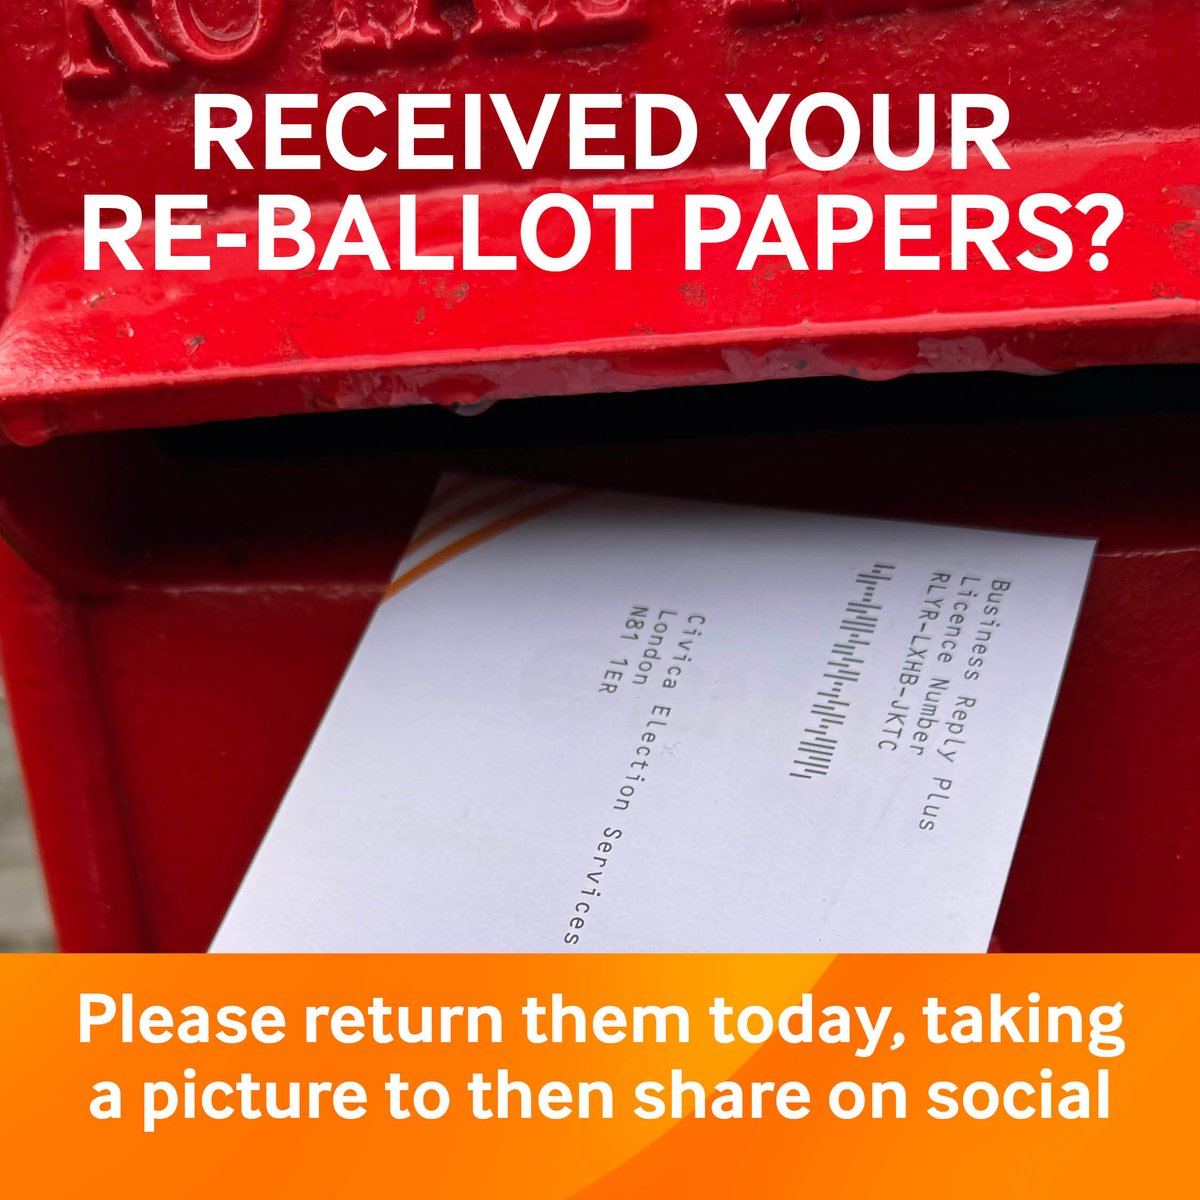 If you haven't voted in the consultant’s re-ballot for industrial action yet then please do so soon. At least 50% turnout needed to win, so your vote really does count. Post your ballot back by 11 December. Not received a ballot? Request a new one 👇 forms.office.com/e/L7SdfS7AGt